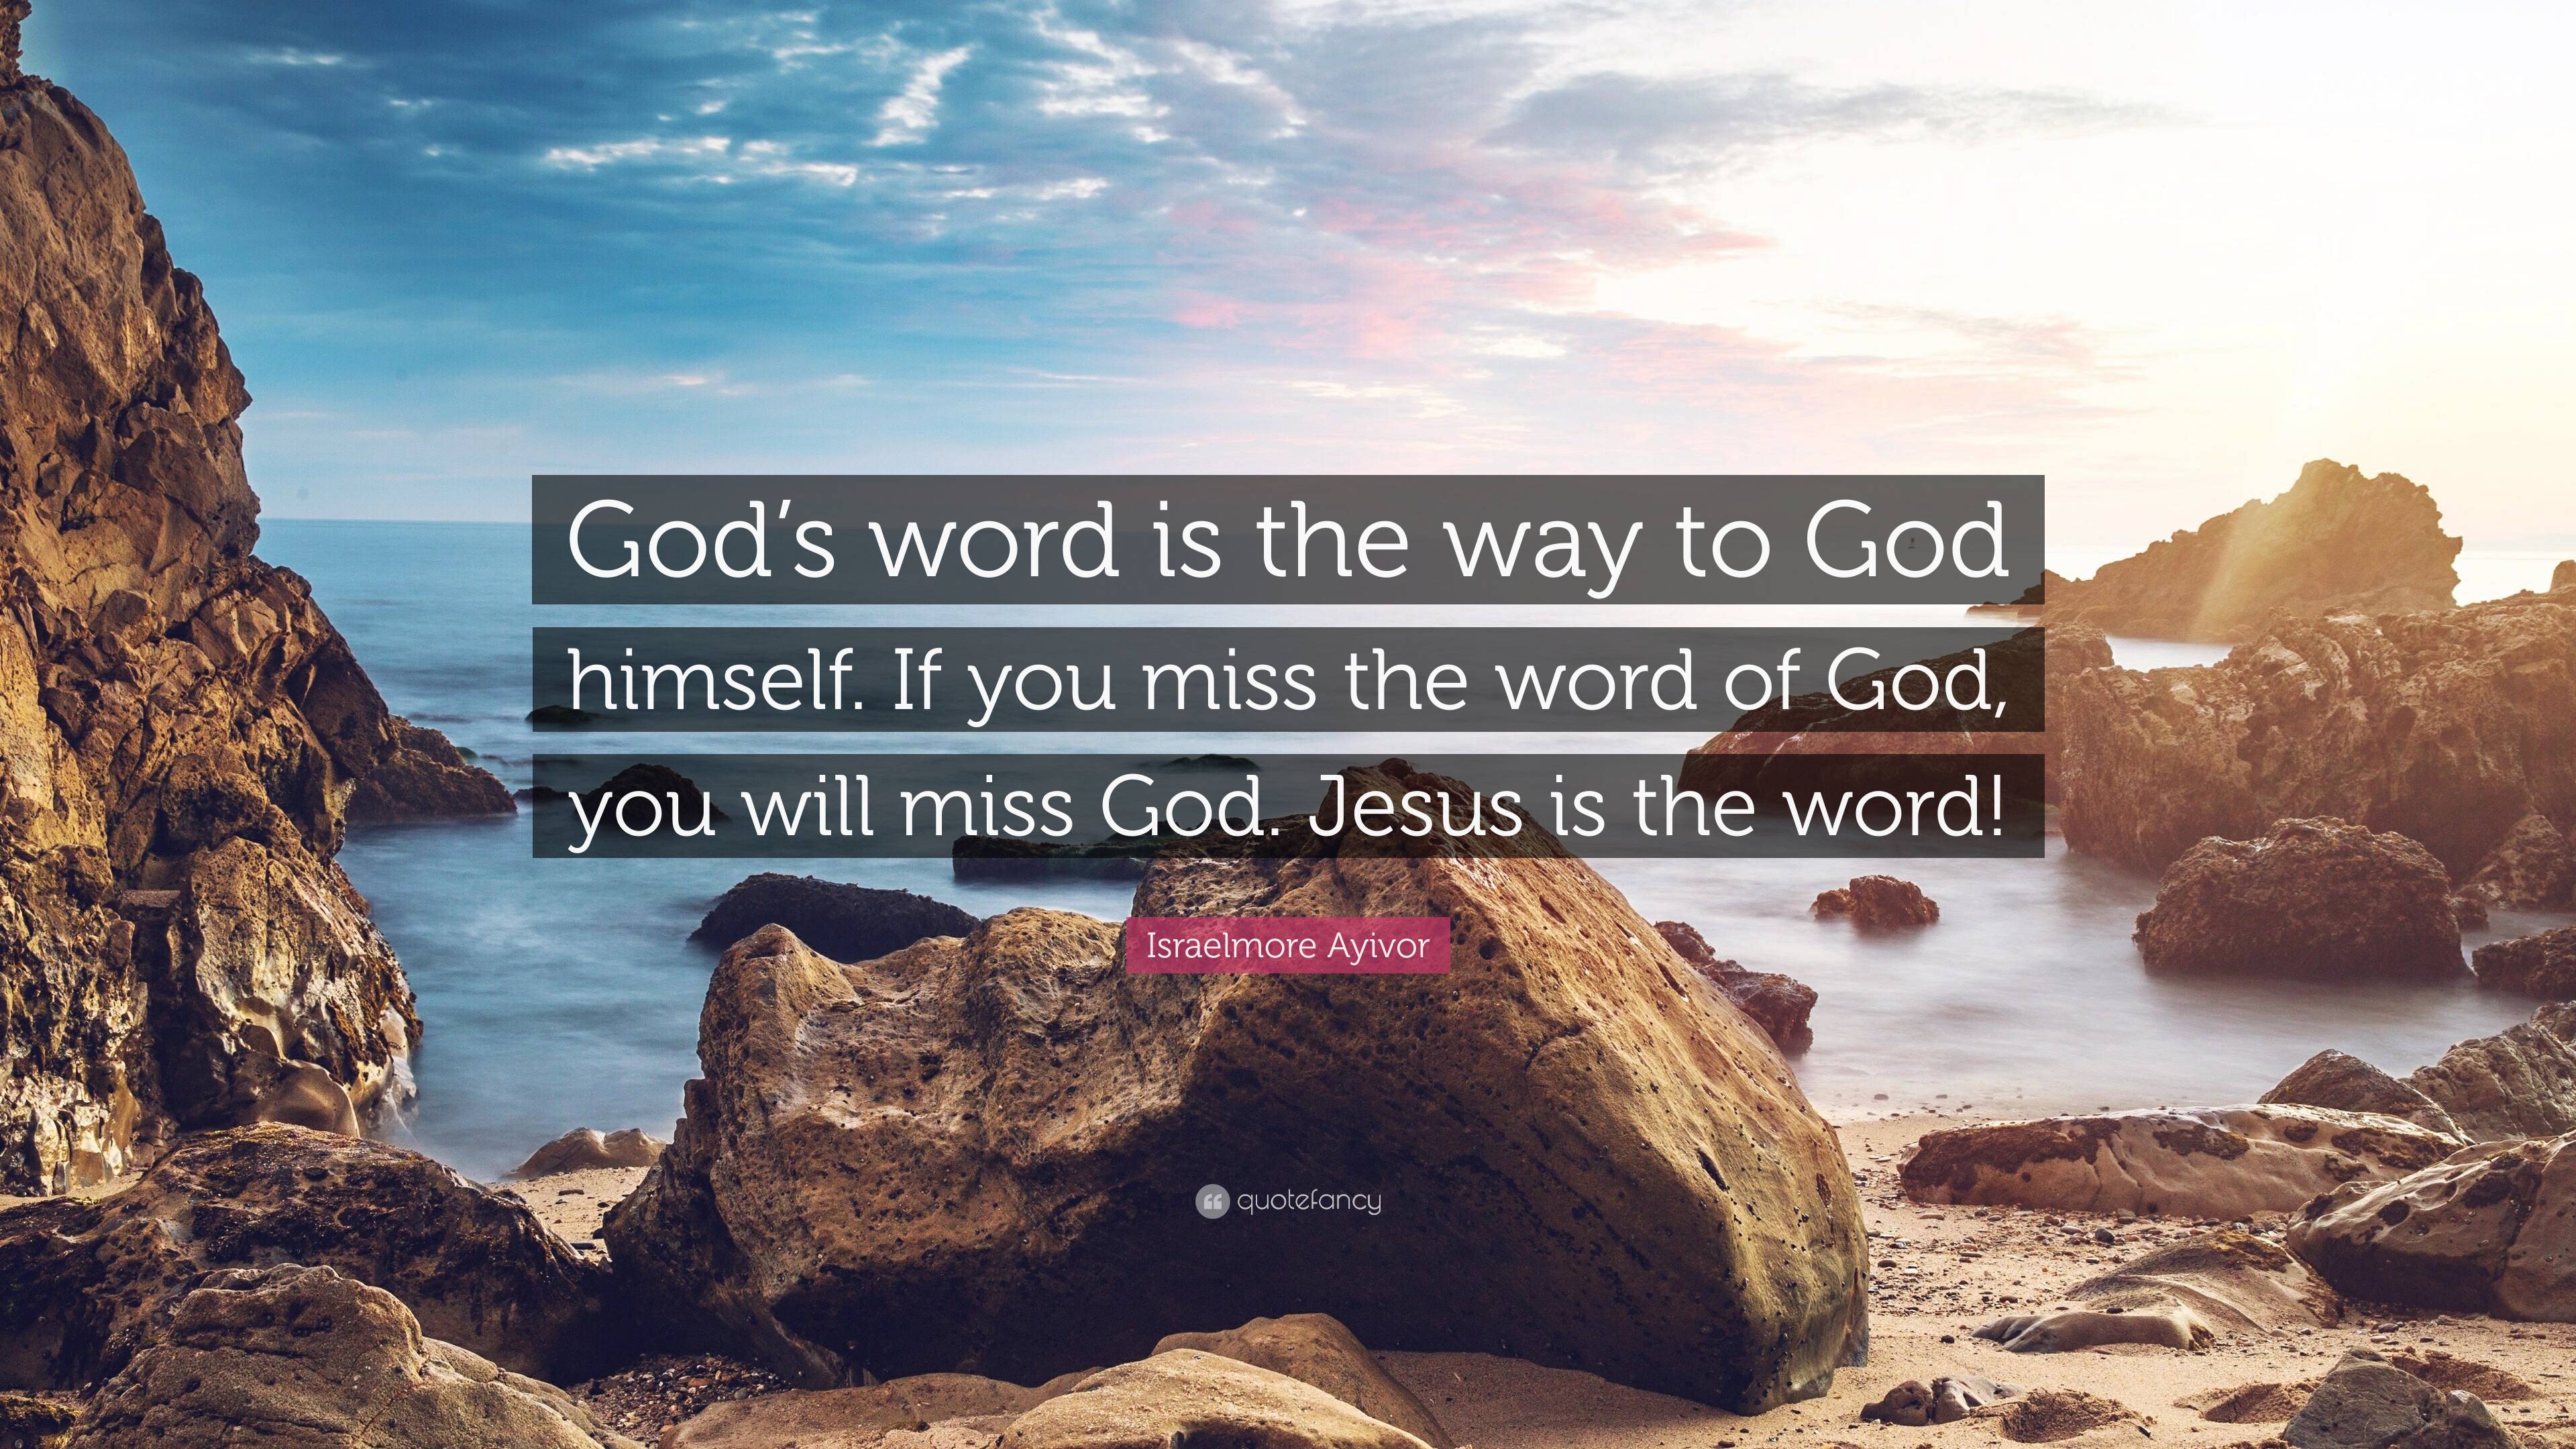 Israelmore Ayivor Quote: “God’s word is the way to God himself. If you ...